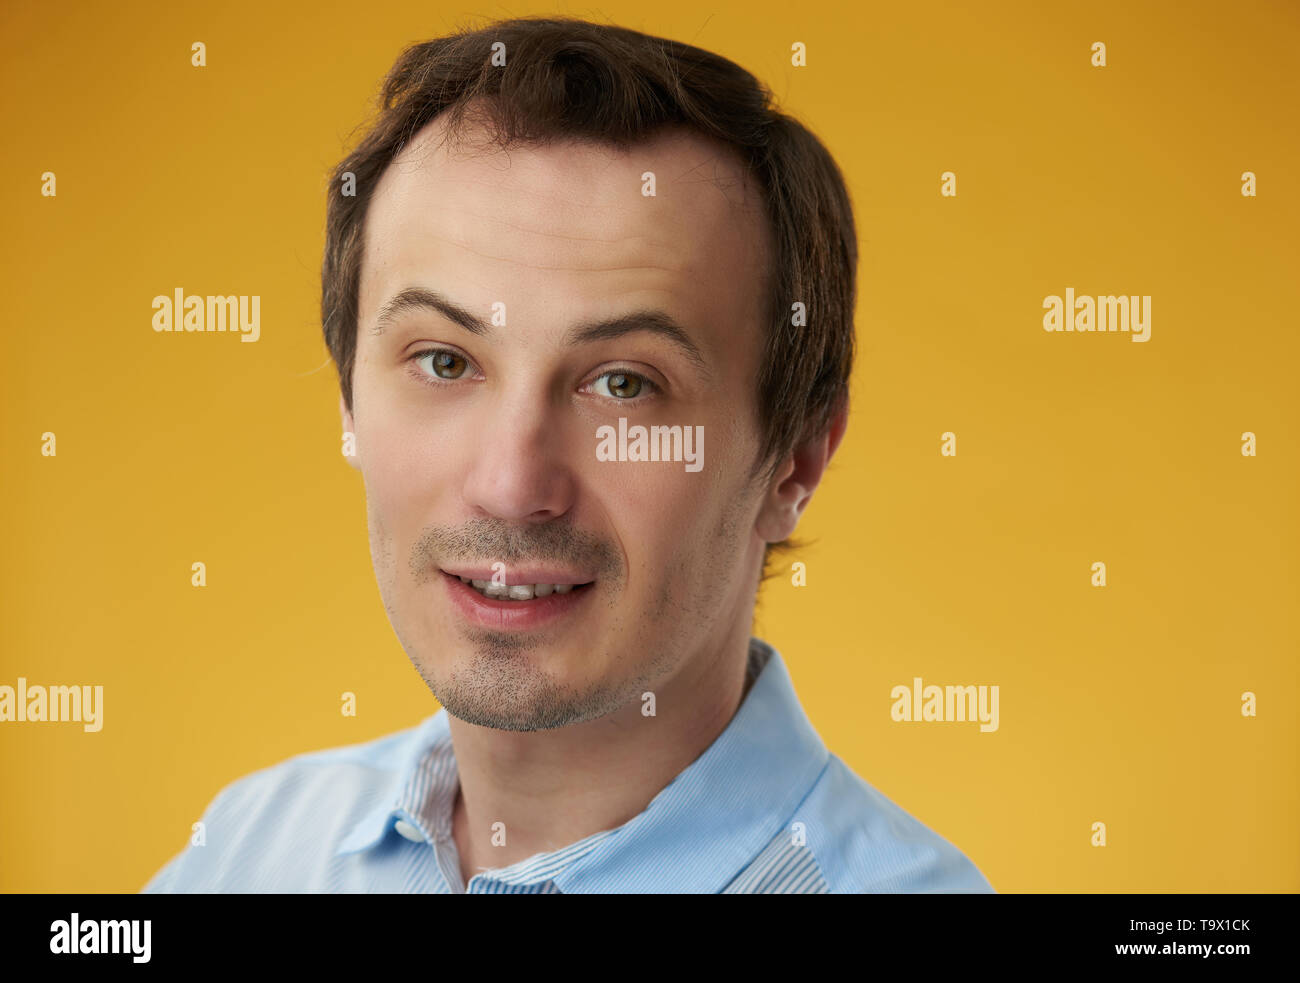 Russian white guy headshot smiling on yellow  color background Stock Photo